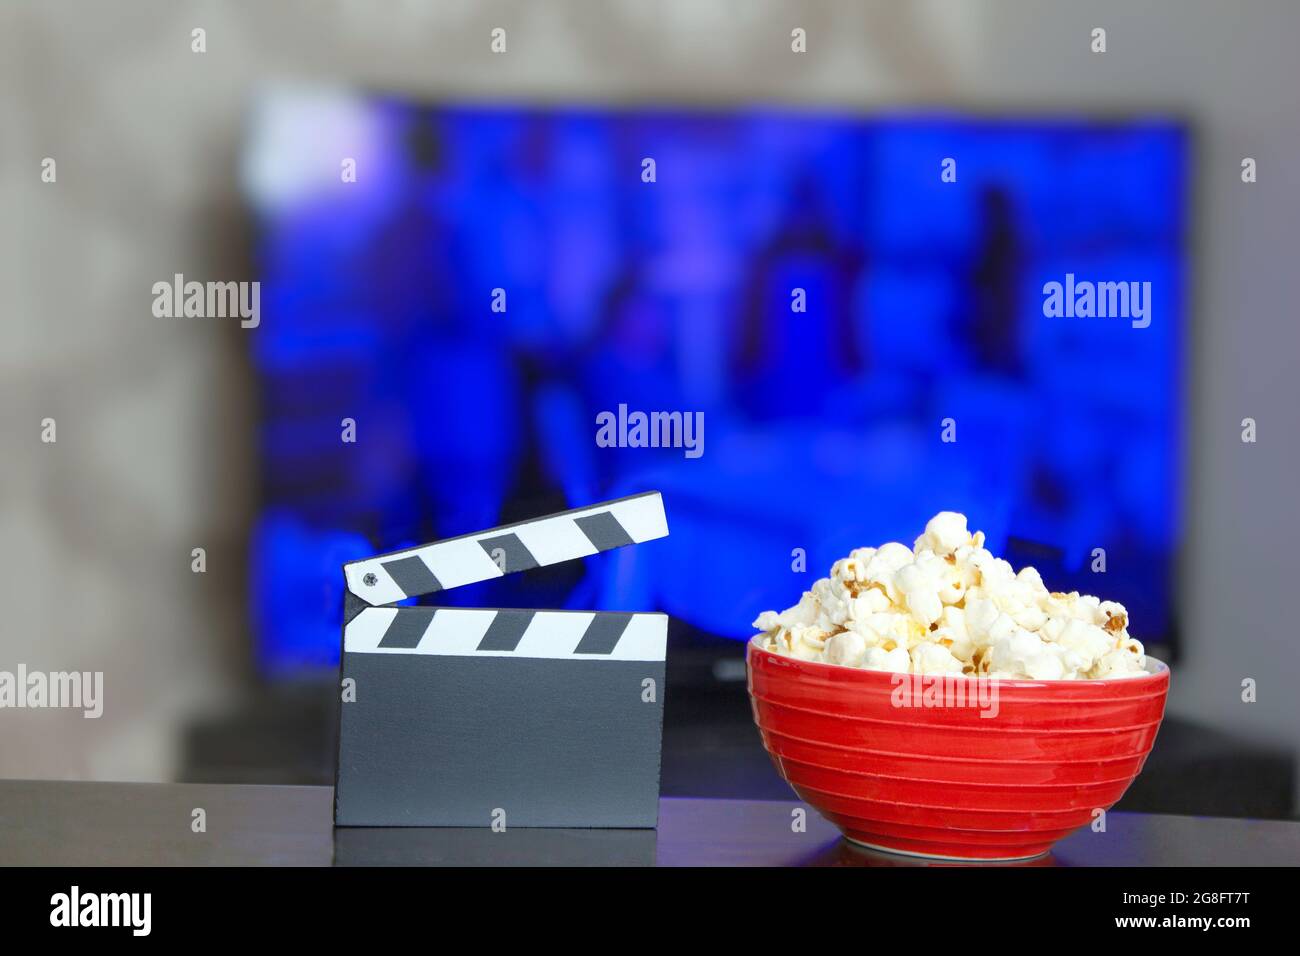 Black movie clapper board and a bowl of popcorn, blurry television in background. Entertainment industry background photo. Movie time. Watching tv. Stock Photo